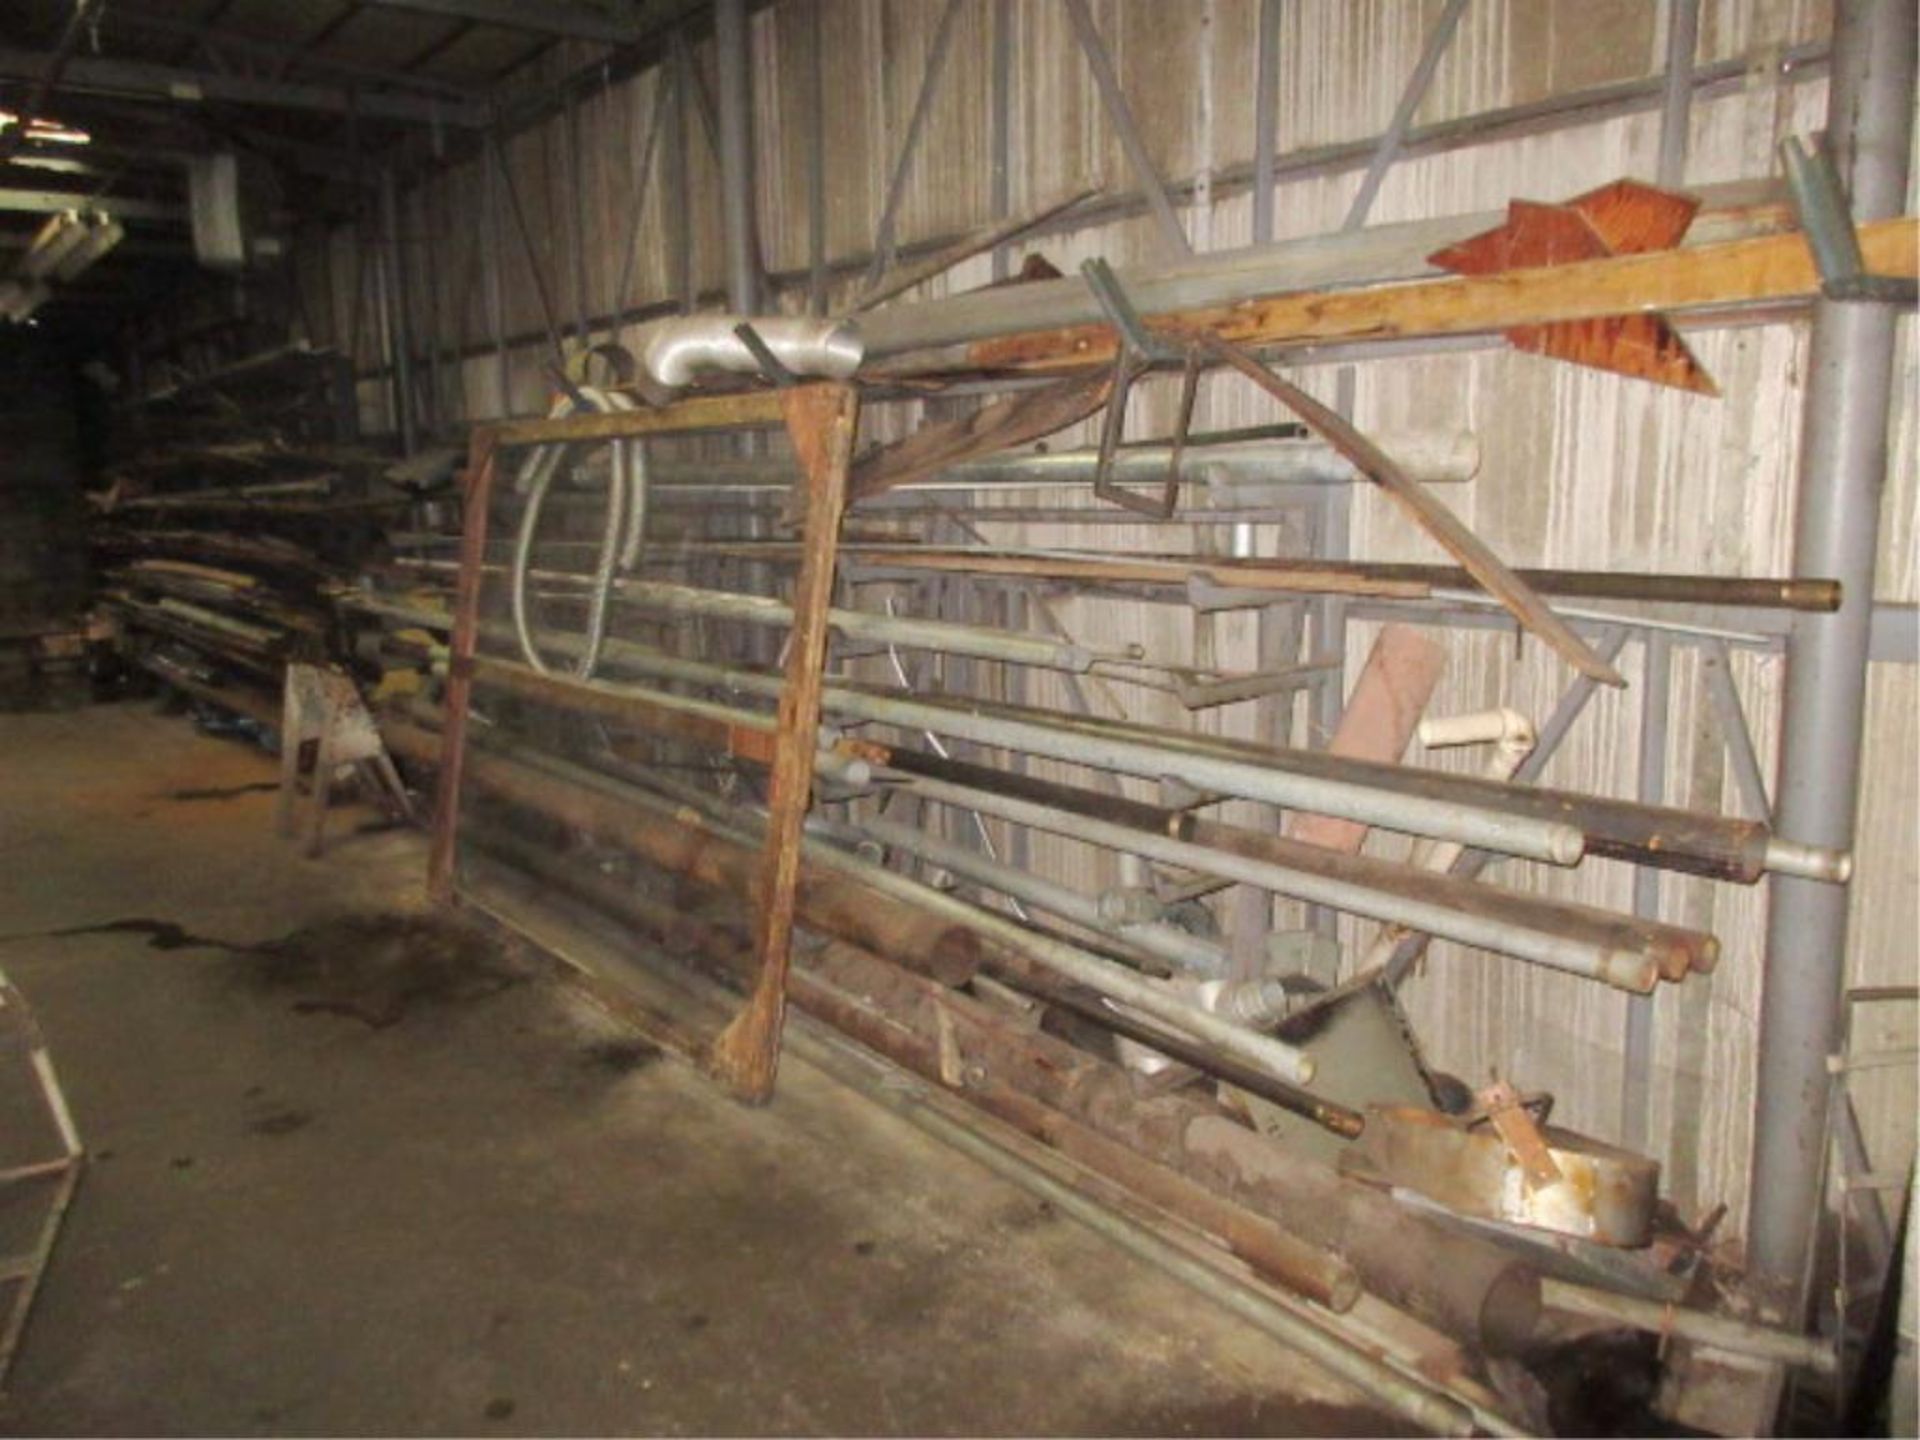 Lot Balance of Steel Contents along walls & in racks. Does not include separately tagged machinery - Image 7 of 8